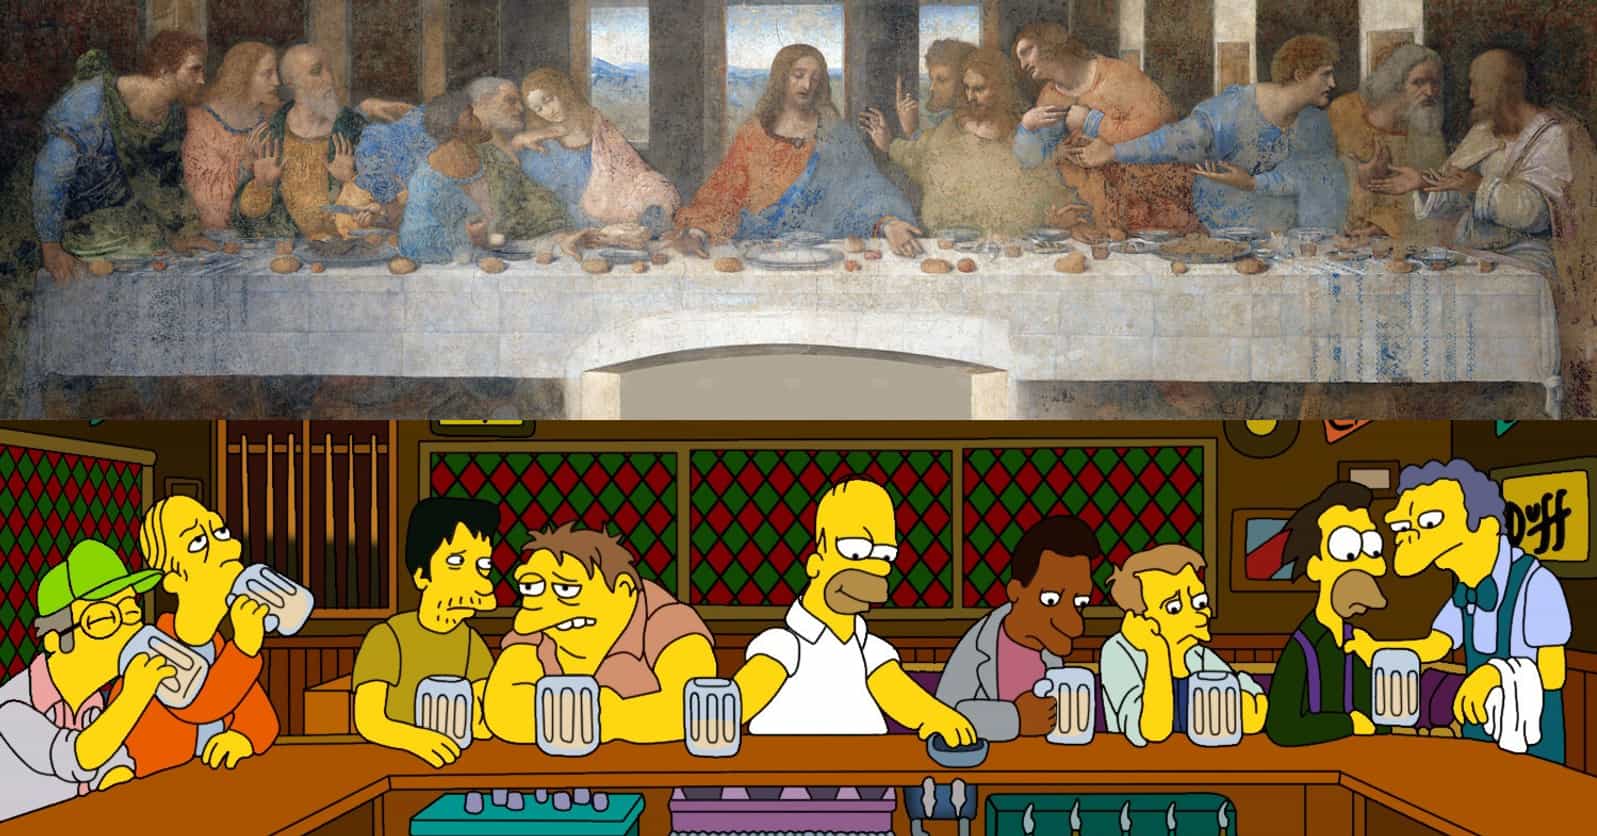 19 Times Movies And TV Shows Re-created Leonardo's 'The Last Supper'